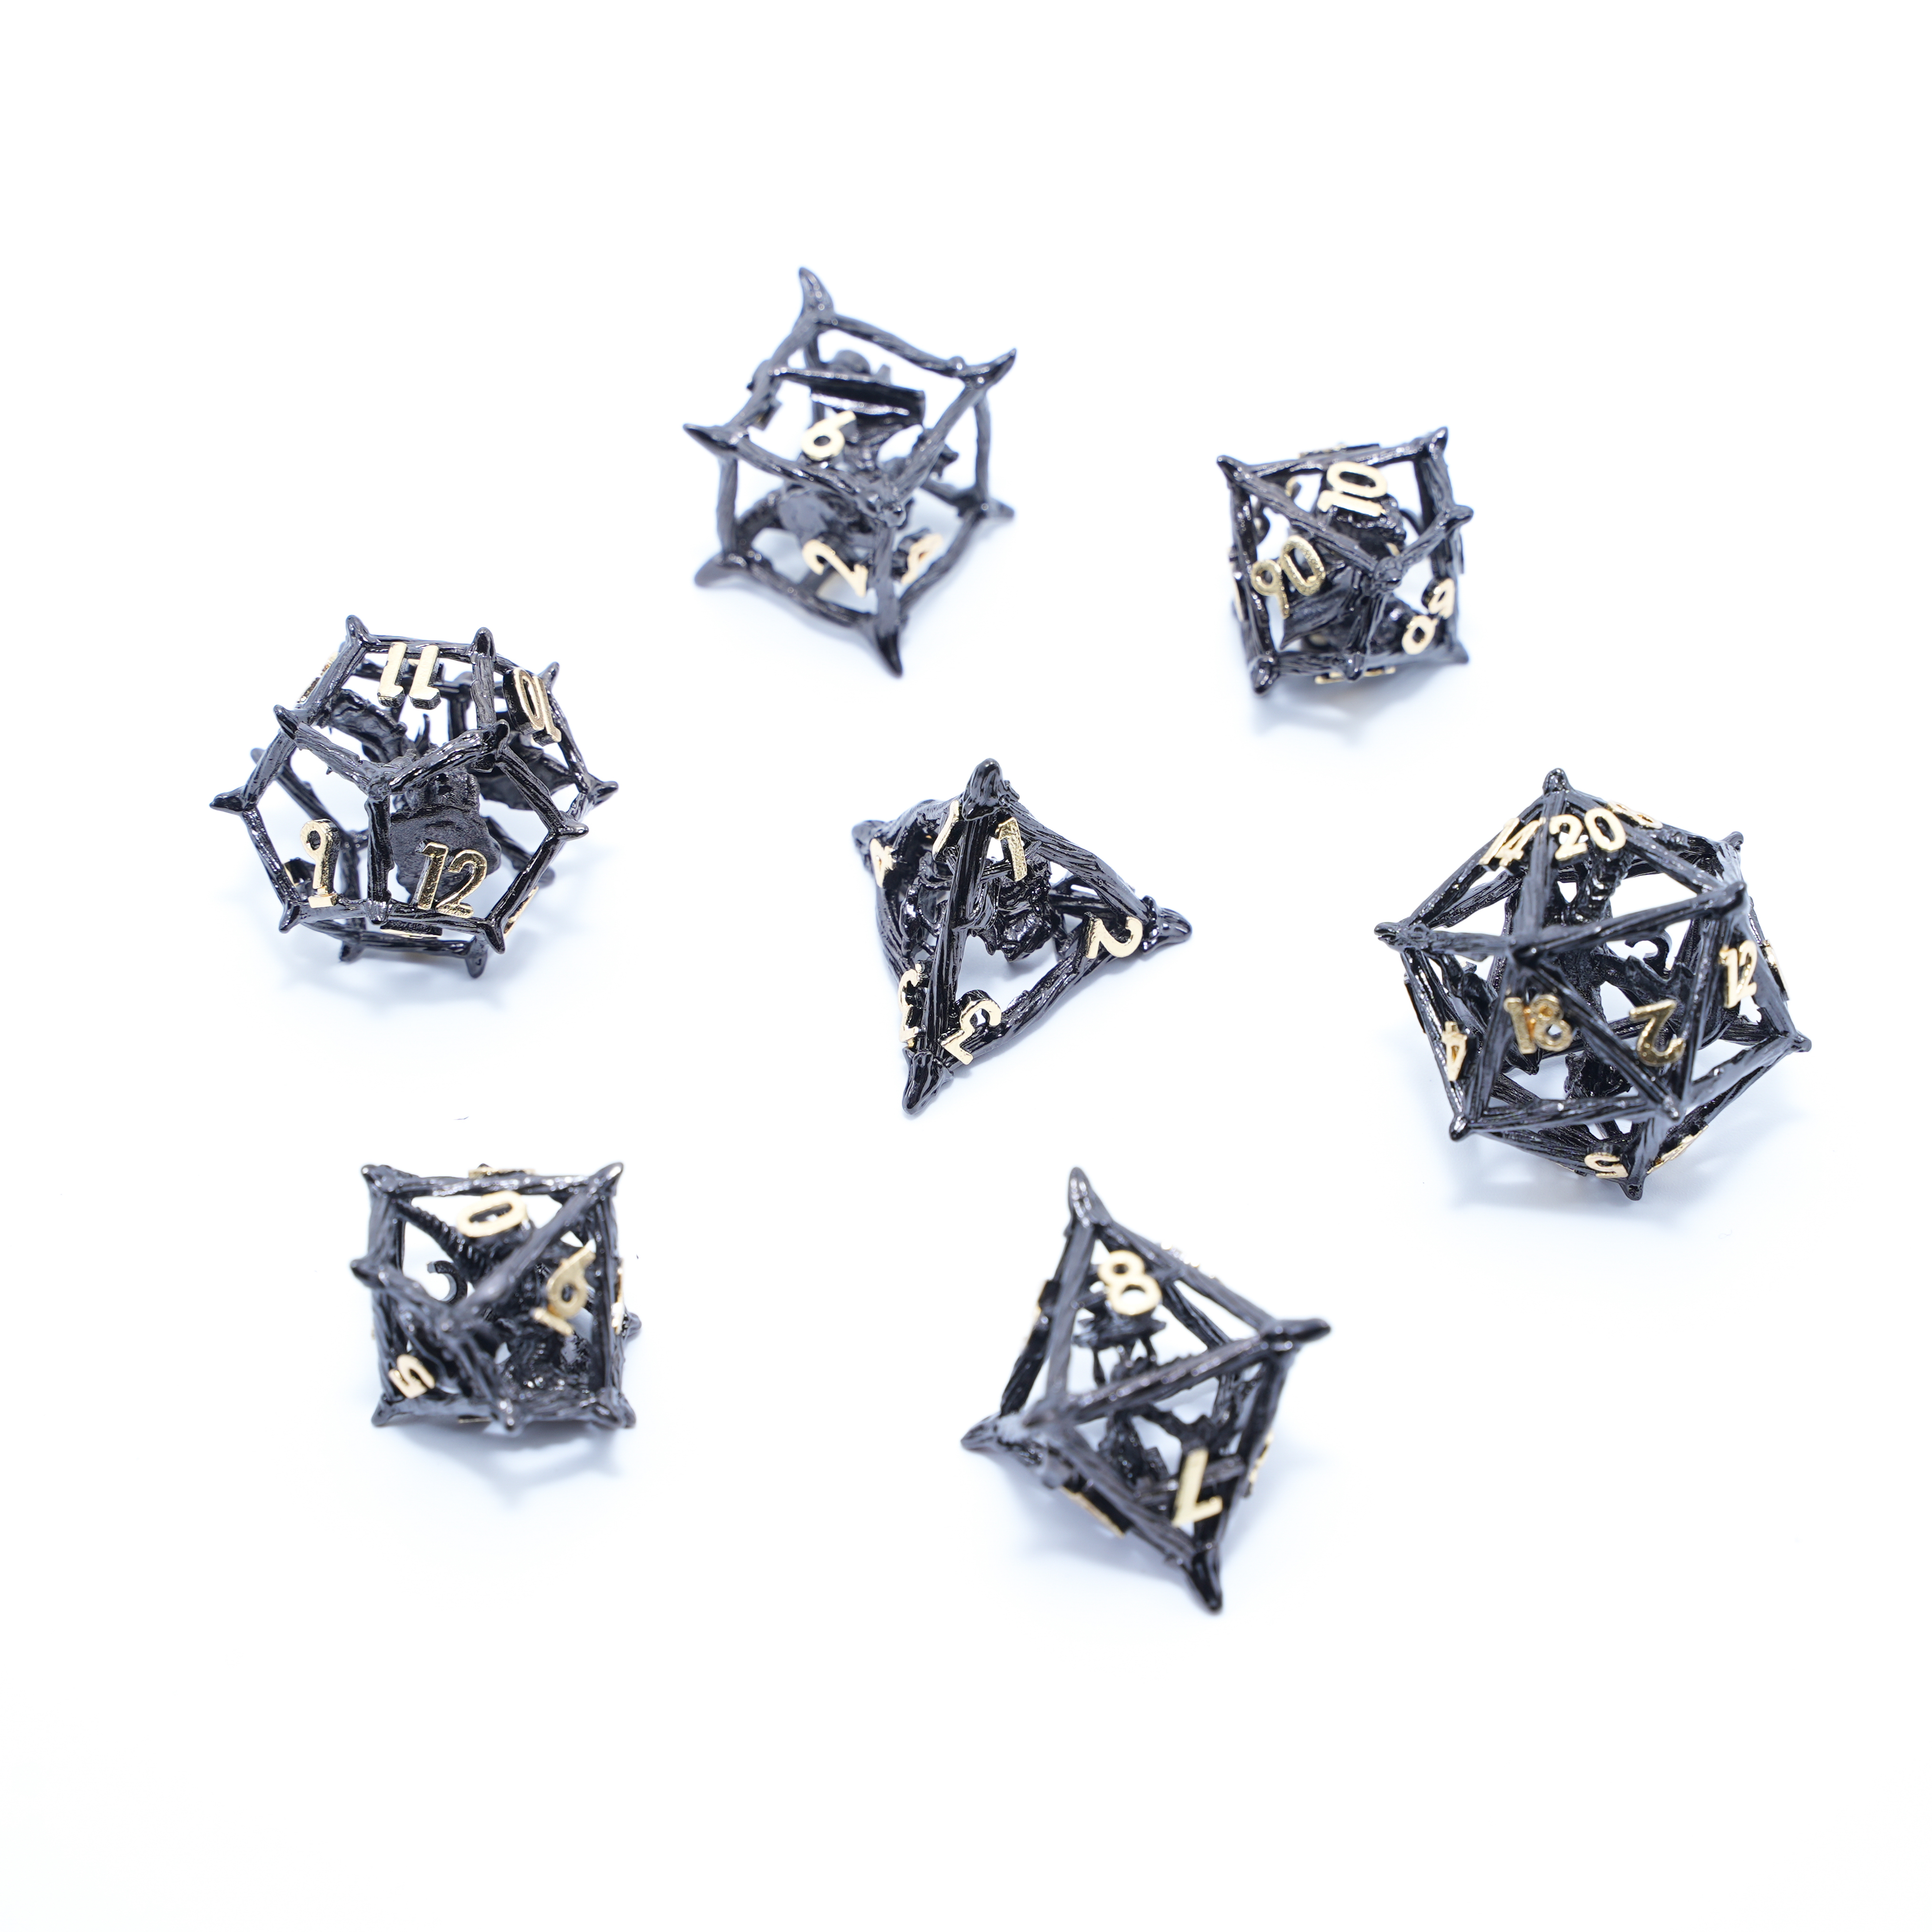 Factory Direct: Spike 3D Dragon Dice Available in OPP Bags or Iron Boxes. Get Yours Now!